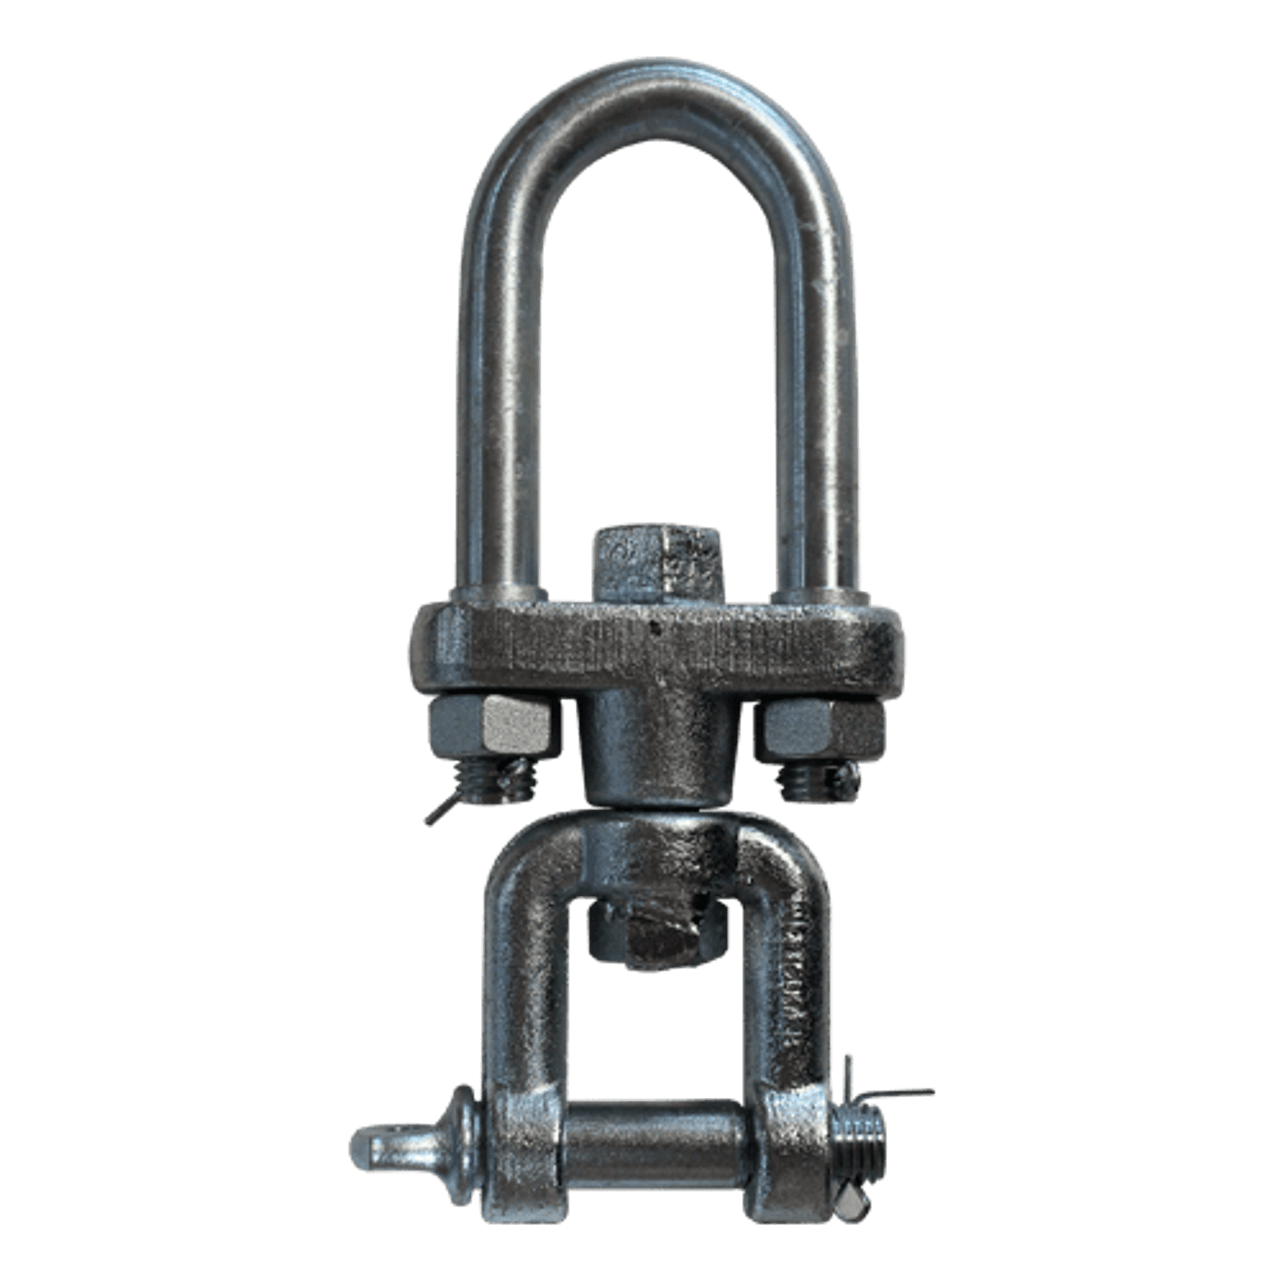 https://cdn11.bigcommerce.com/s-3isu88t/images/stencil/1280x1280/products/514/3042/Abaco_Swivel_Shackle__83026.1654020734.png?c=2